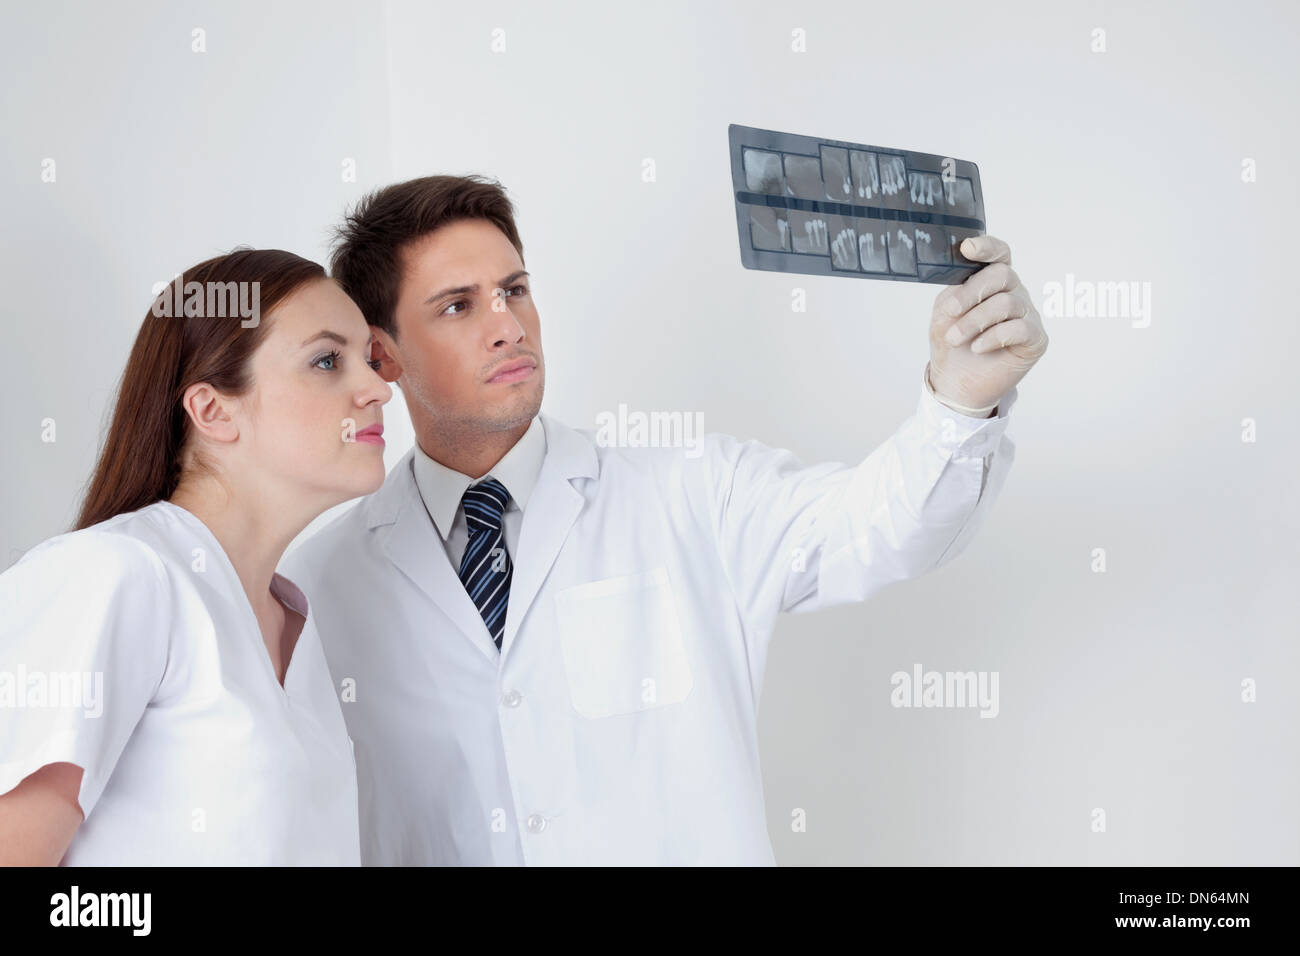 Doctor And Assistant Analyzing Patient's Report Stock Photo